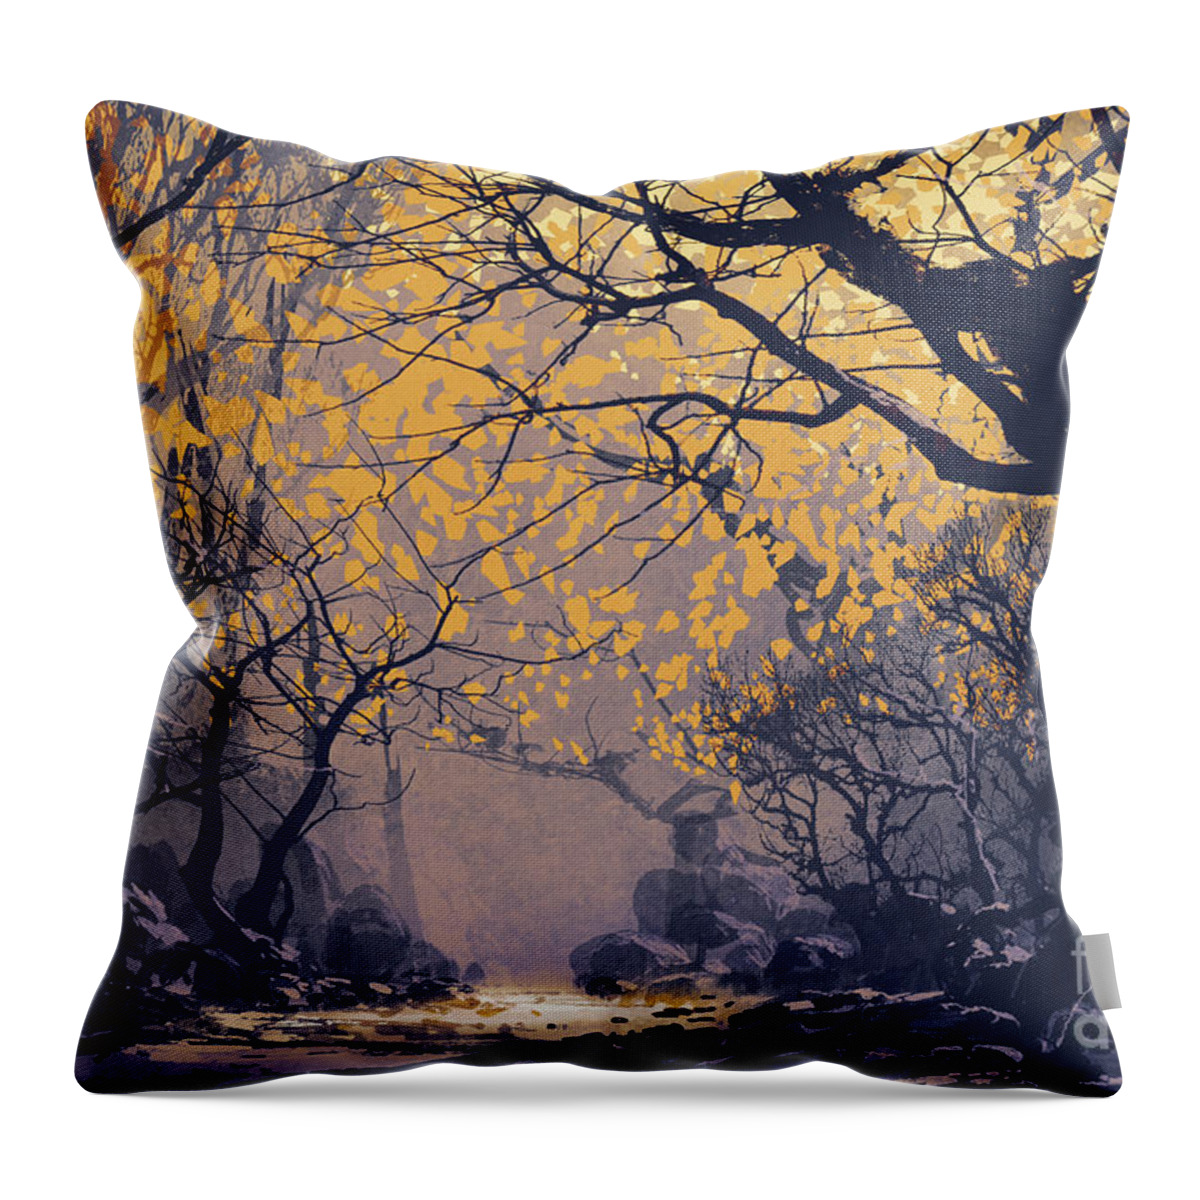 Art Throw Pillow featuring the painting Dark Forest by Tithi Luadthong